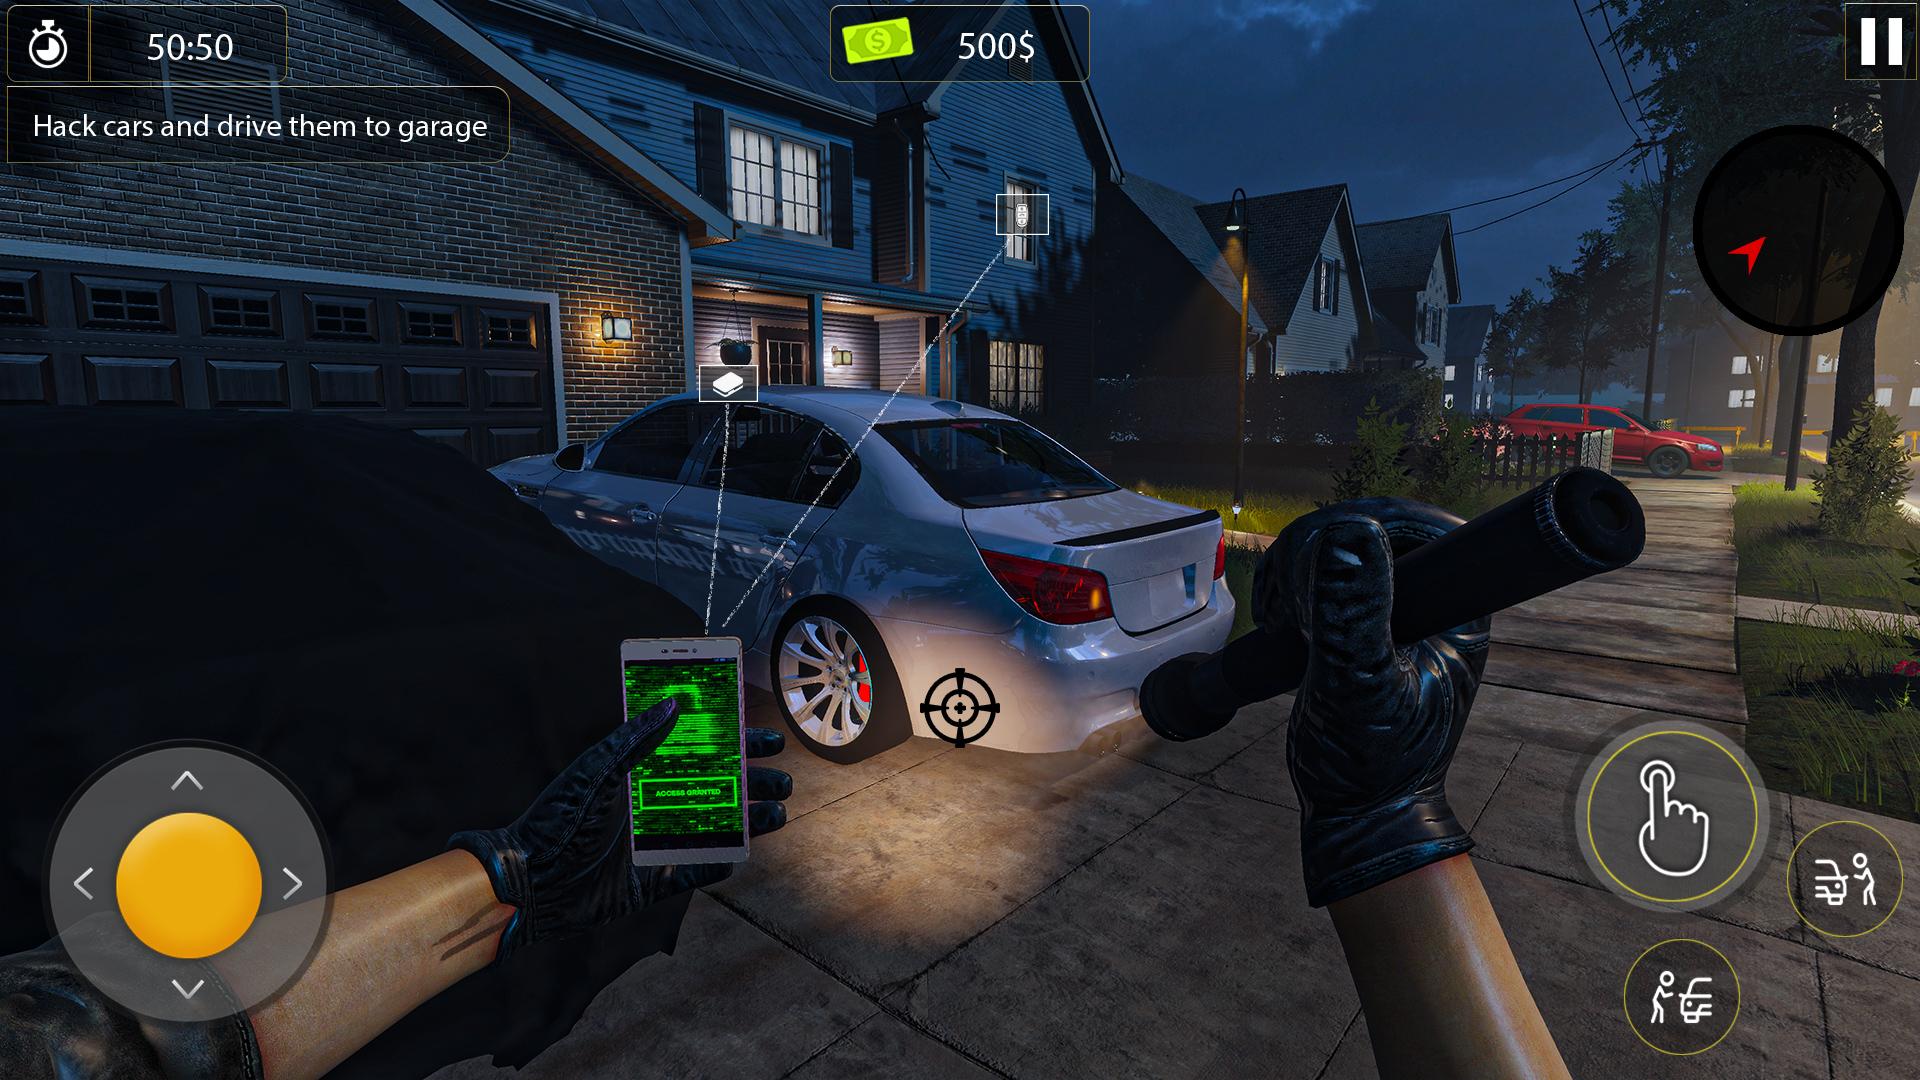 Hacker simulator - Bank Heist APK for Android Download